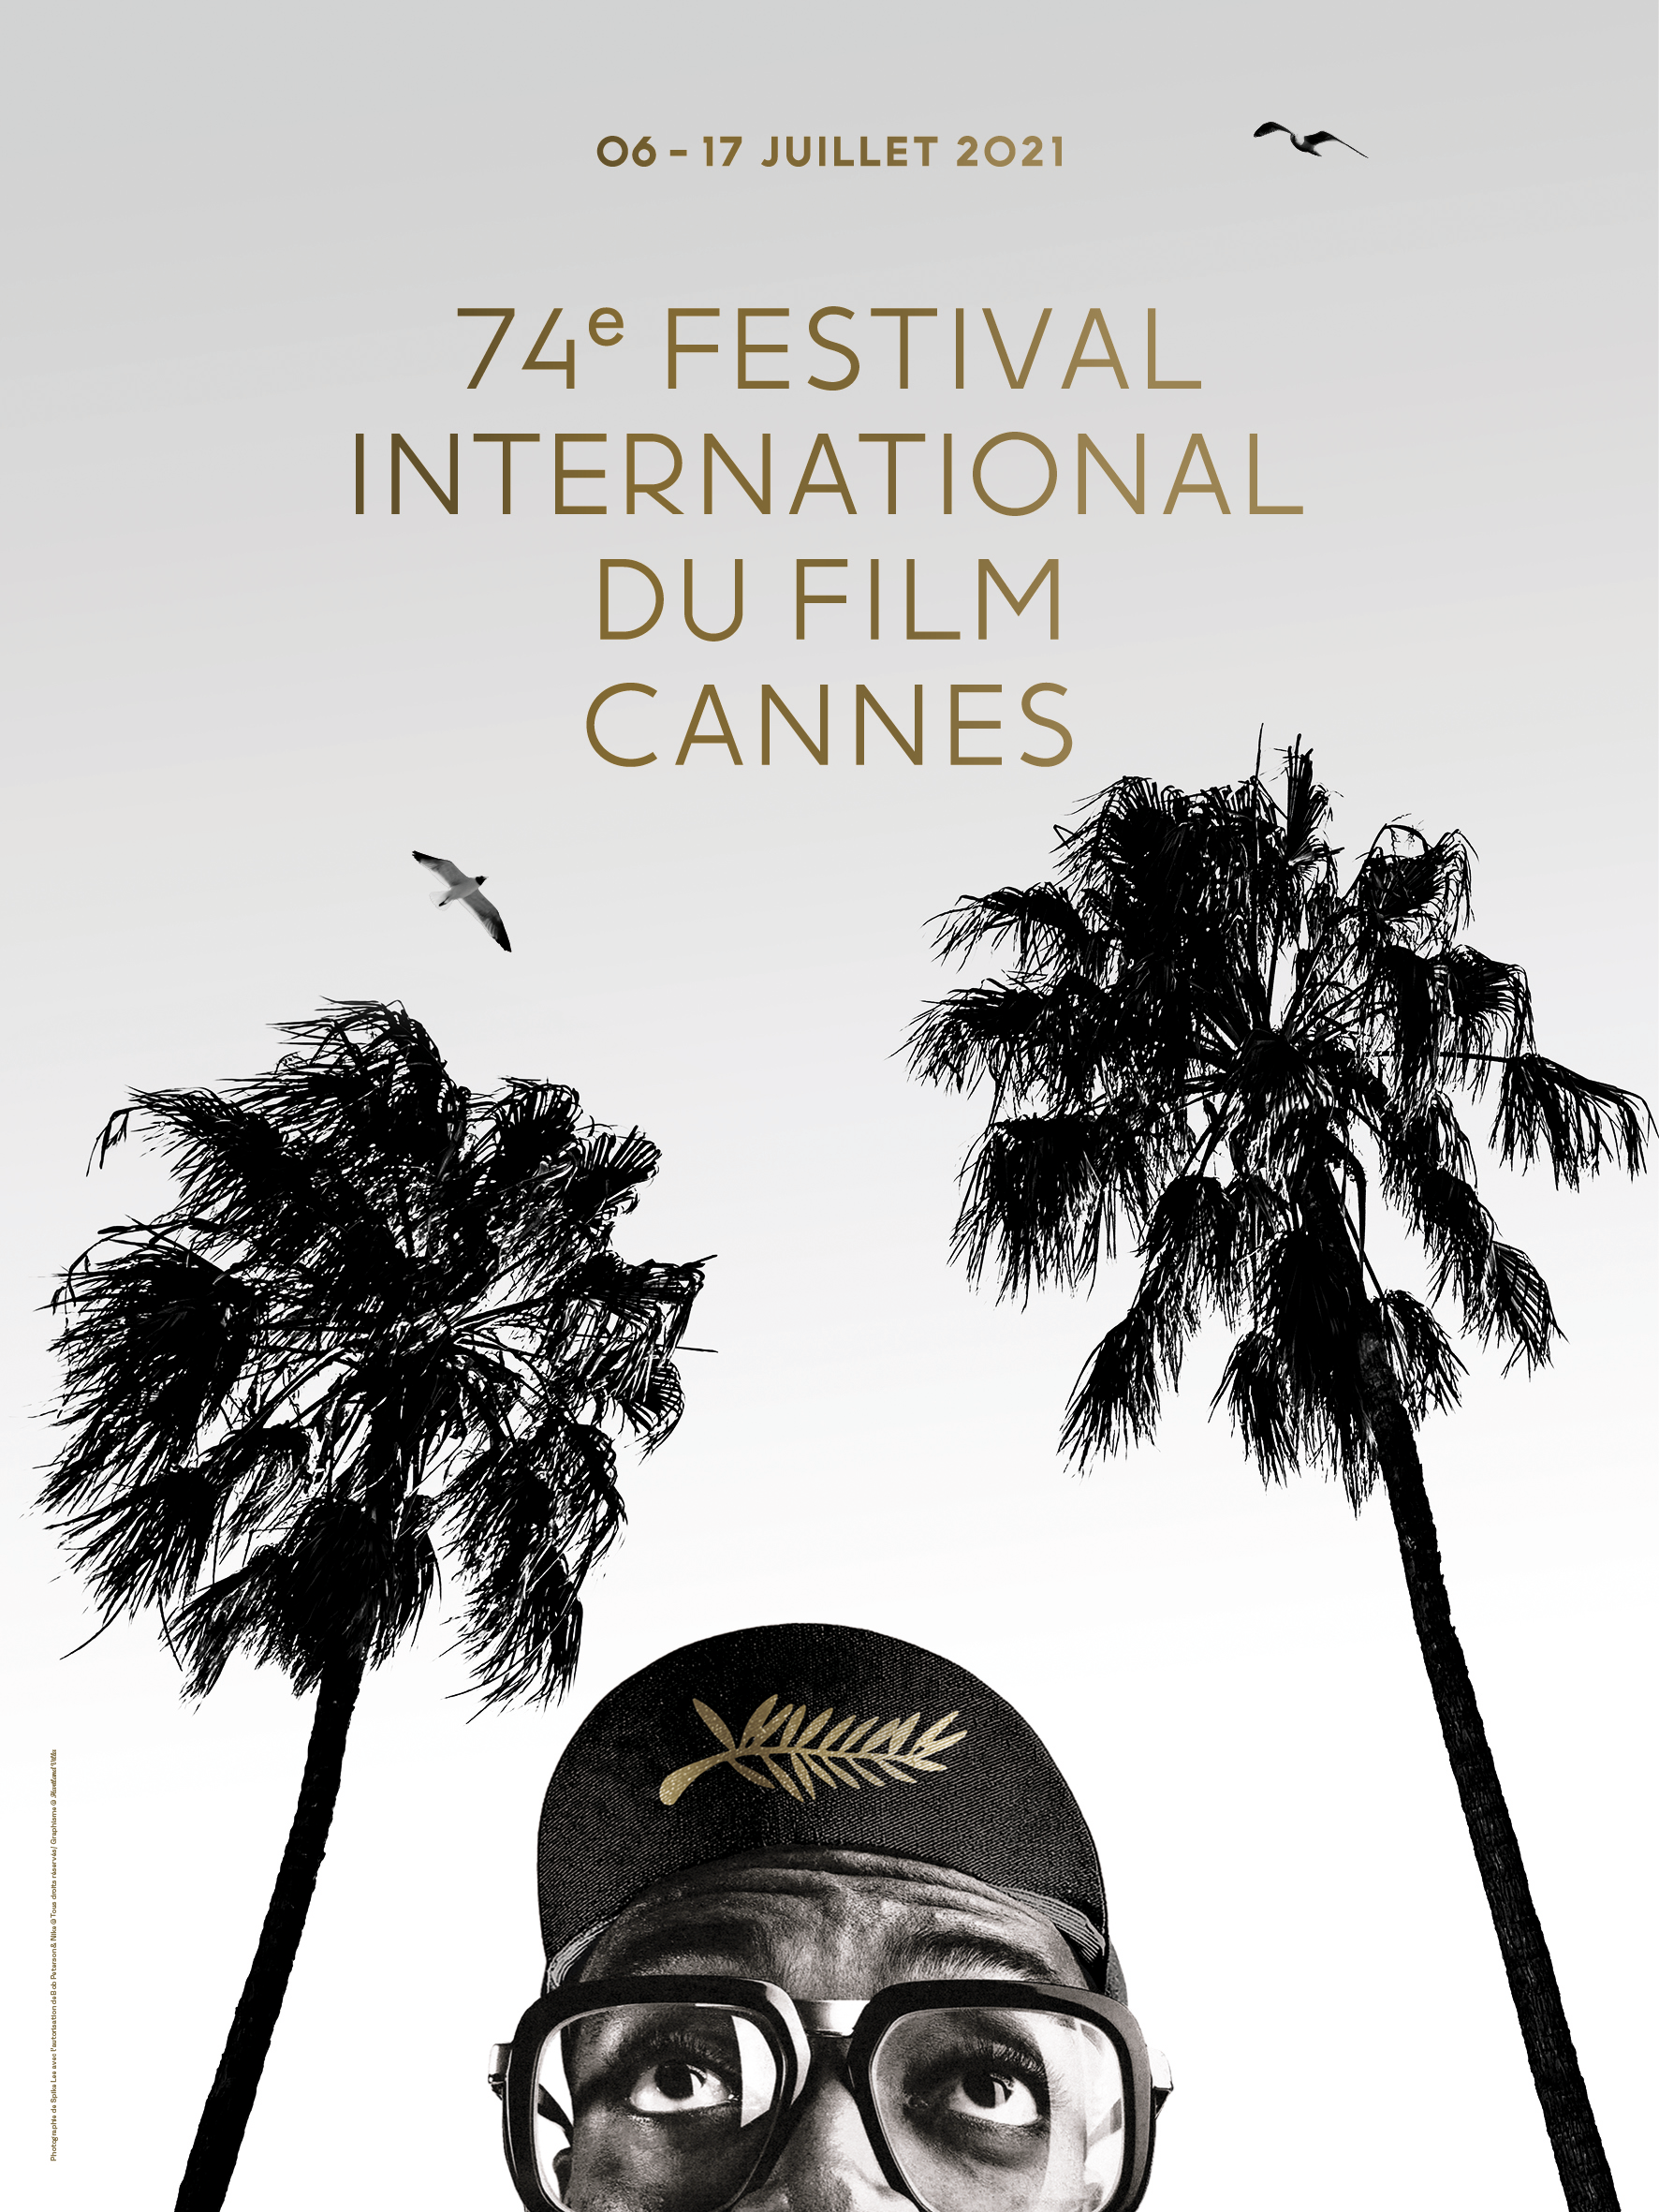 The poster of the 74th Festival de Cannes